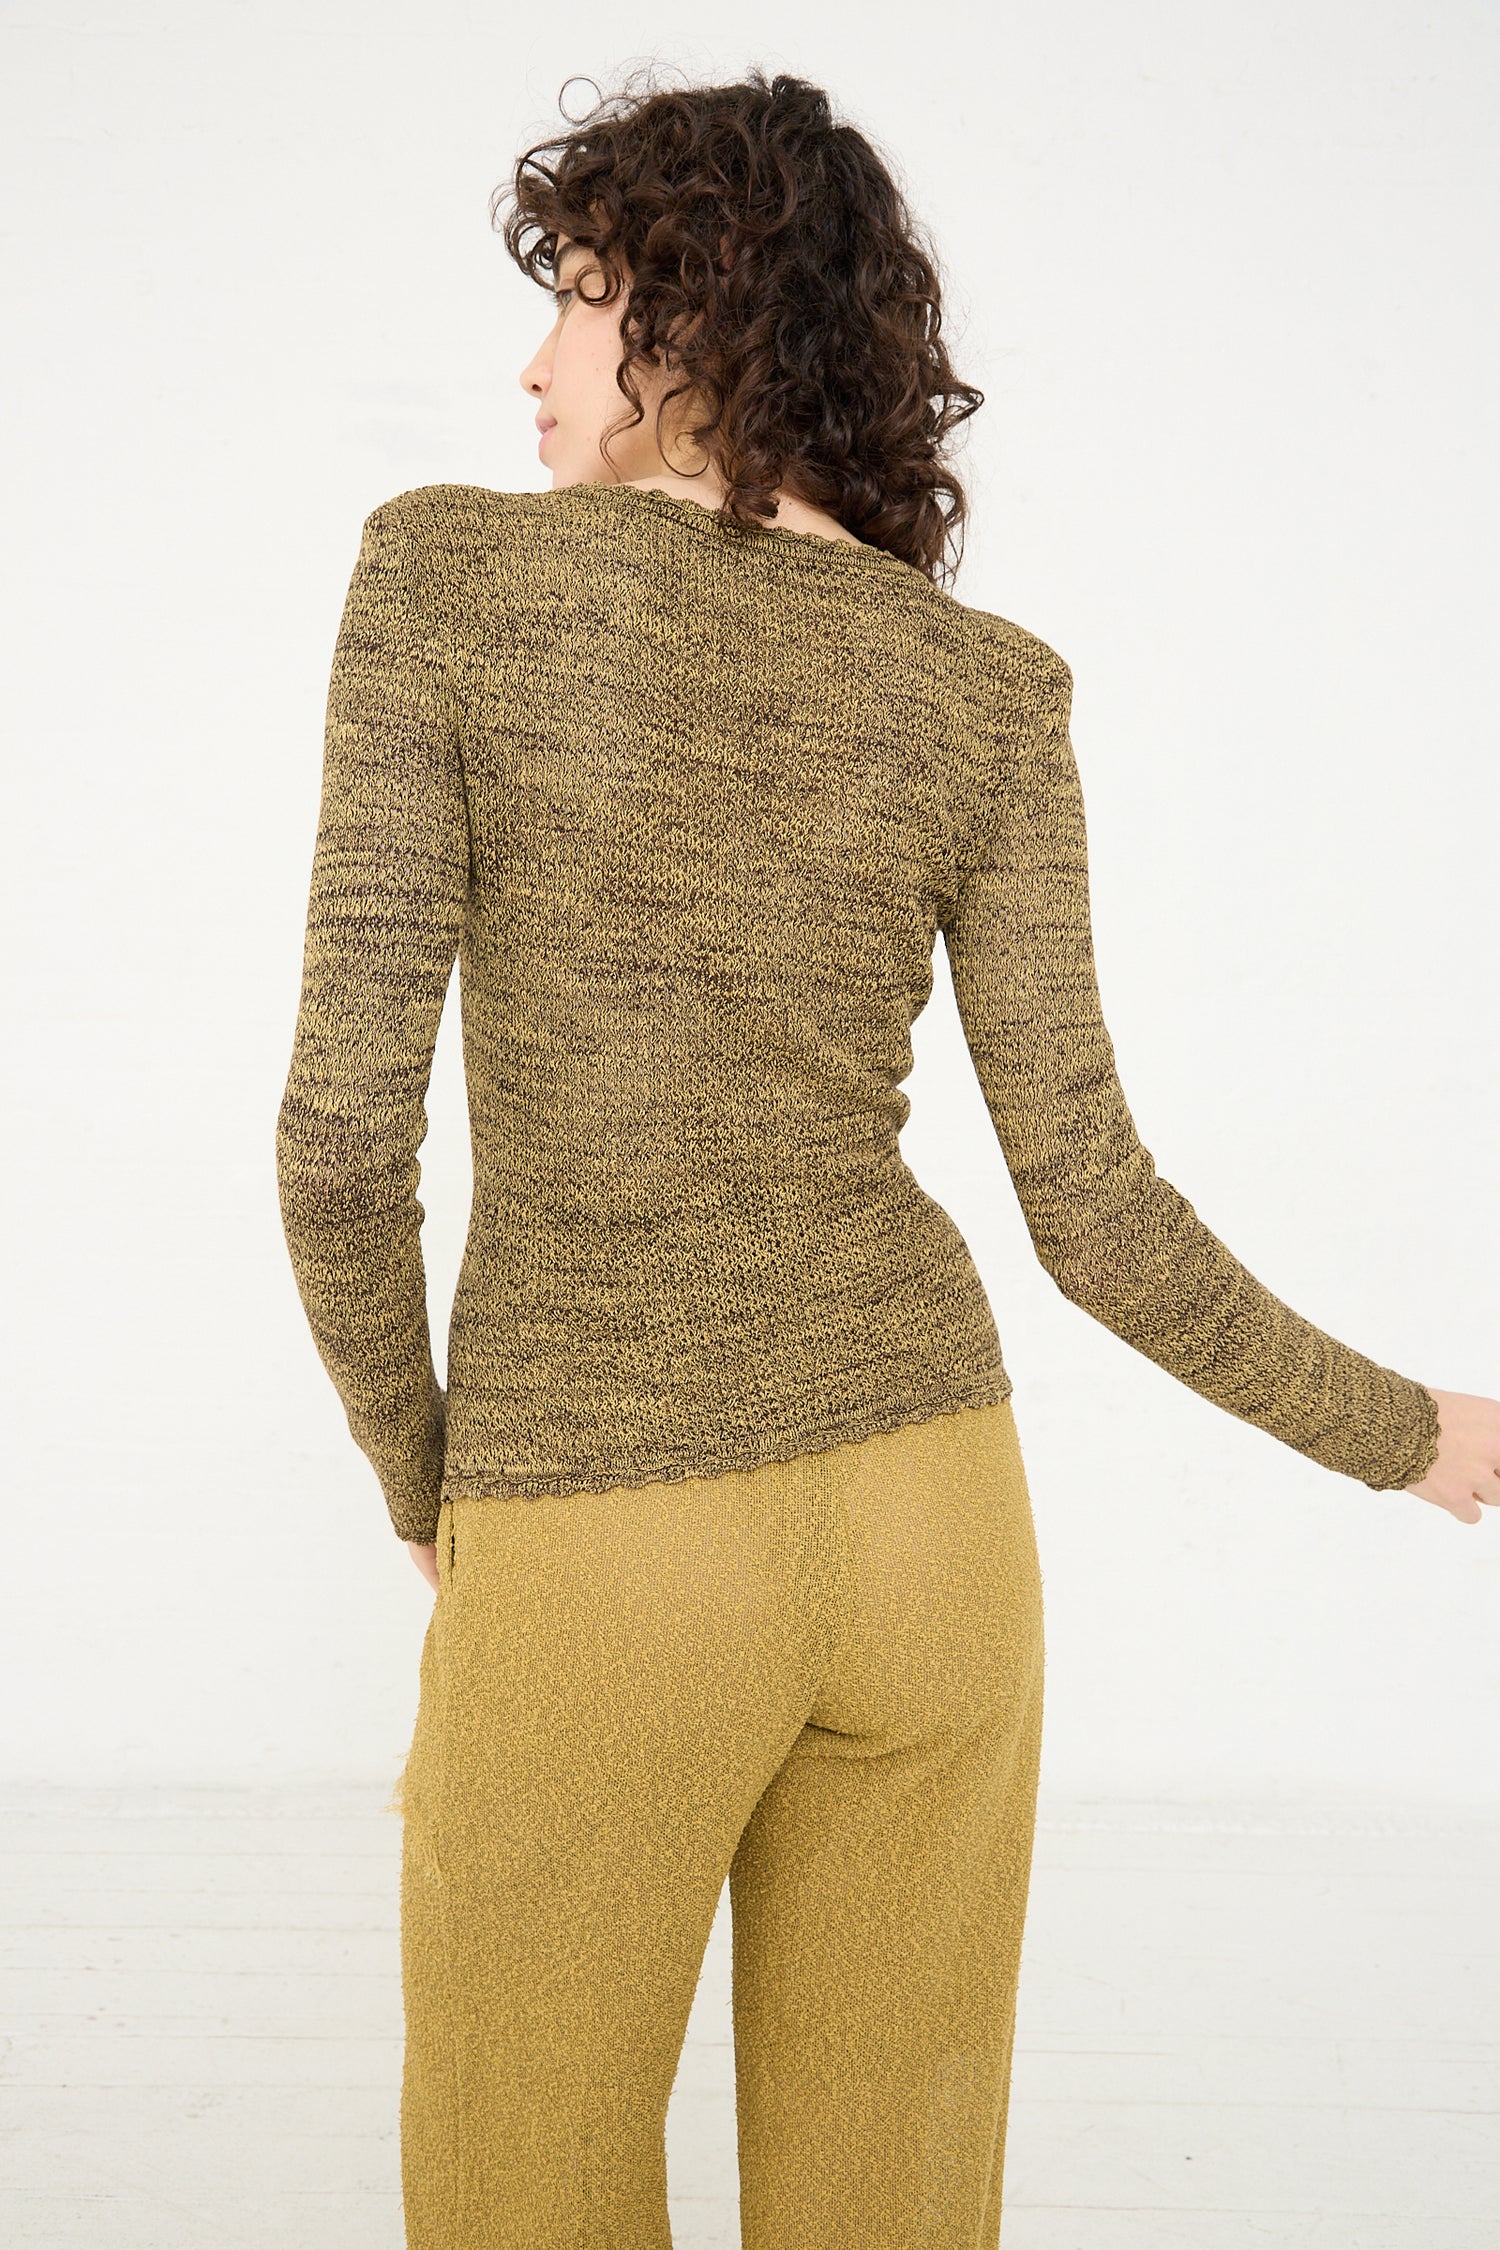 A woman in a brown, Veronique Leroy Long Sleeve Knit Top in Pepper.